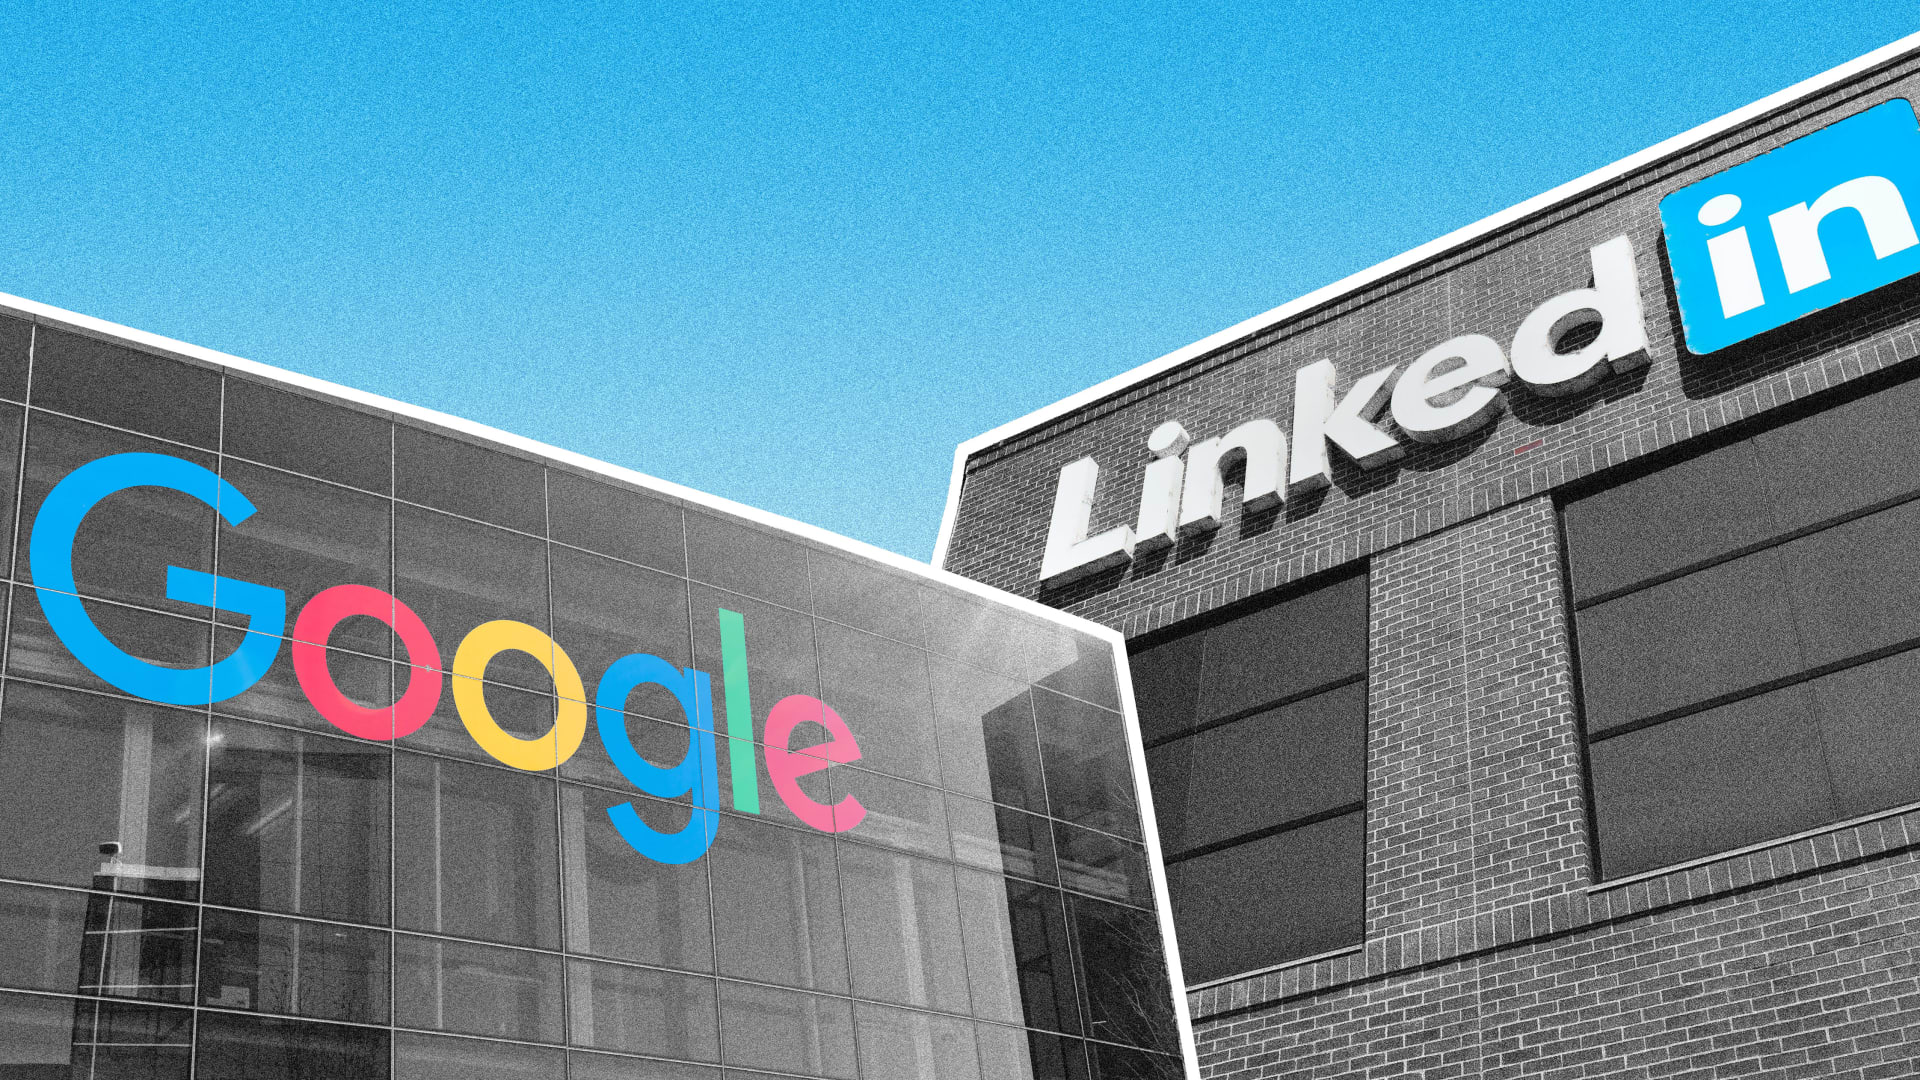 Here's What Google Told LinkedIn, When LinkedIn Asked How to Hire Like Google